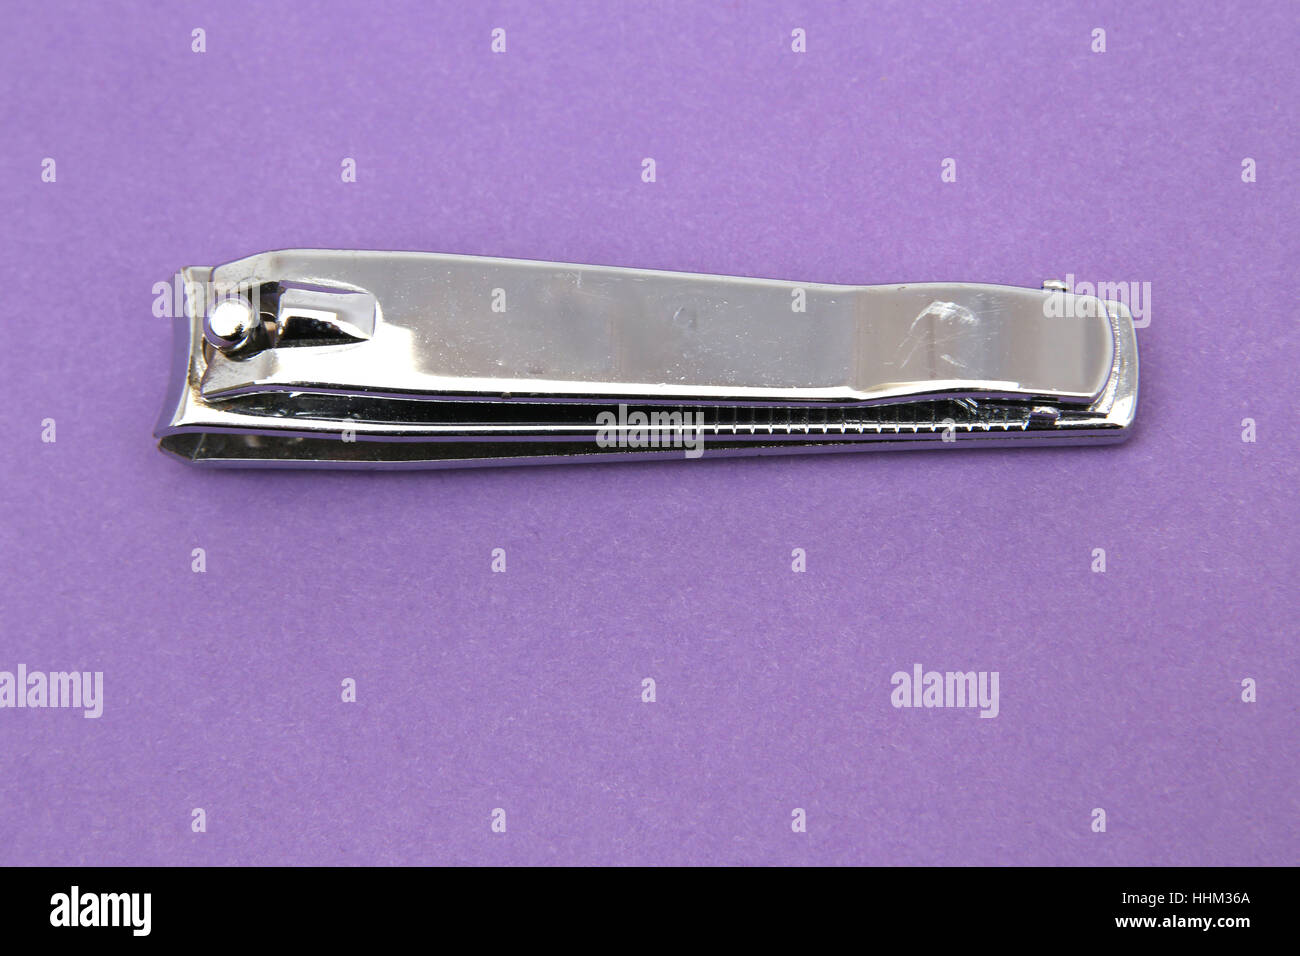 Stainless Steel Nail Clippers With File Stock Photo